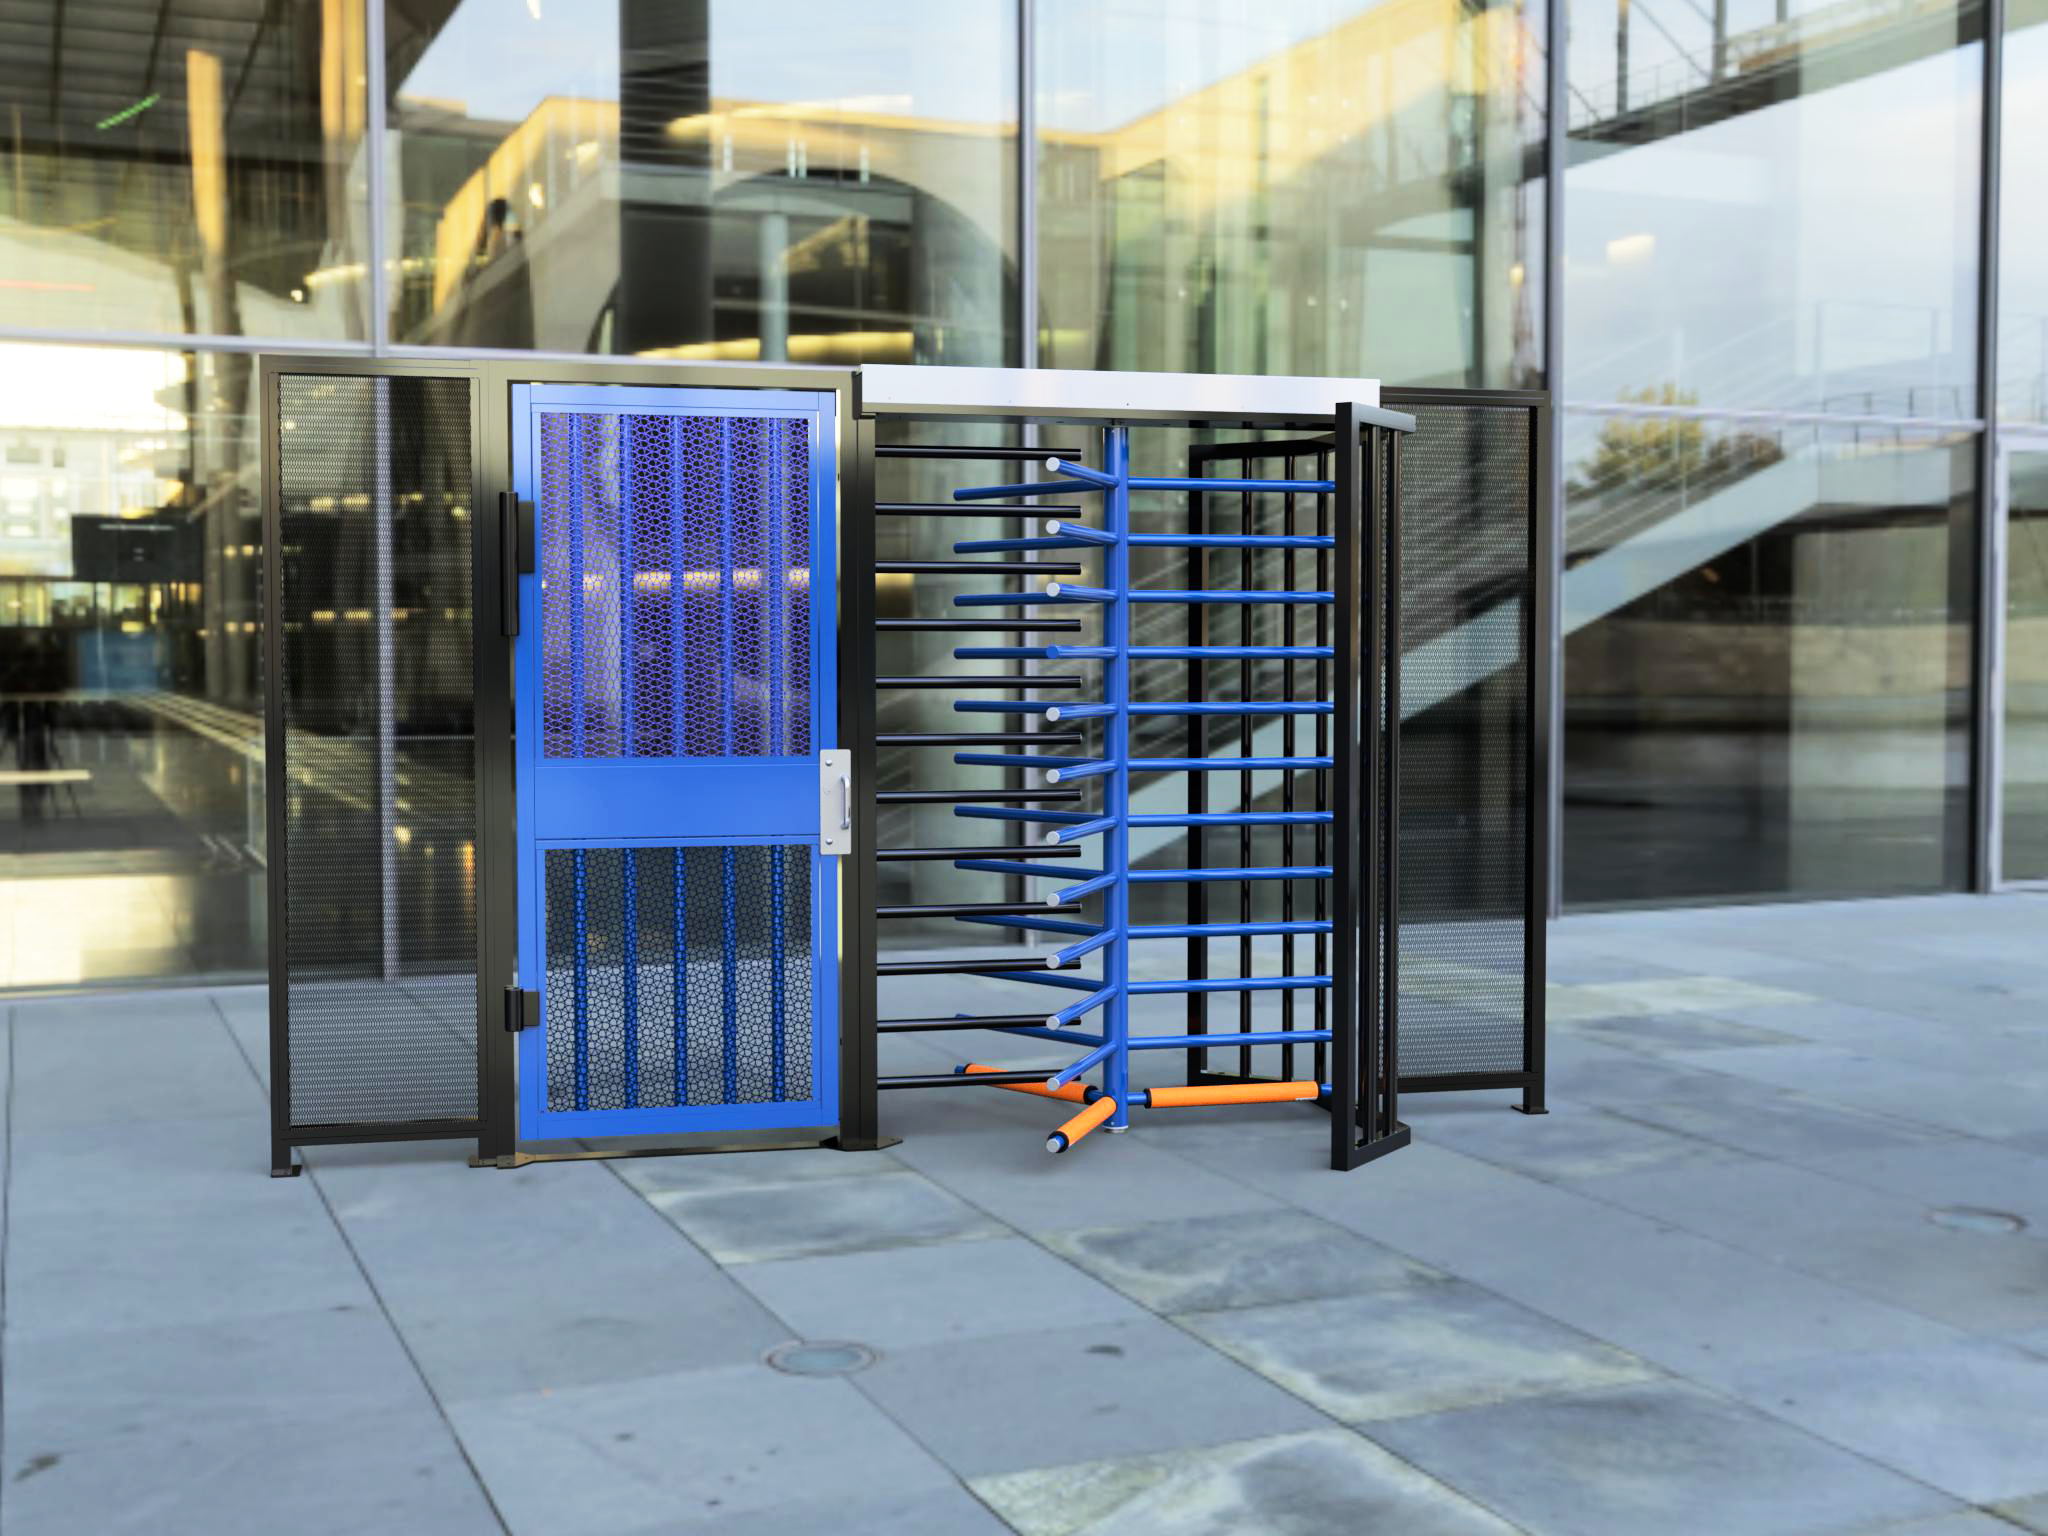 Full height turnstile and full height gate in custom 2-tone blue and black colorway installed in front of office